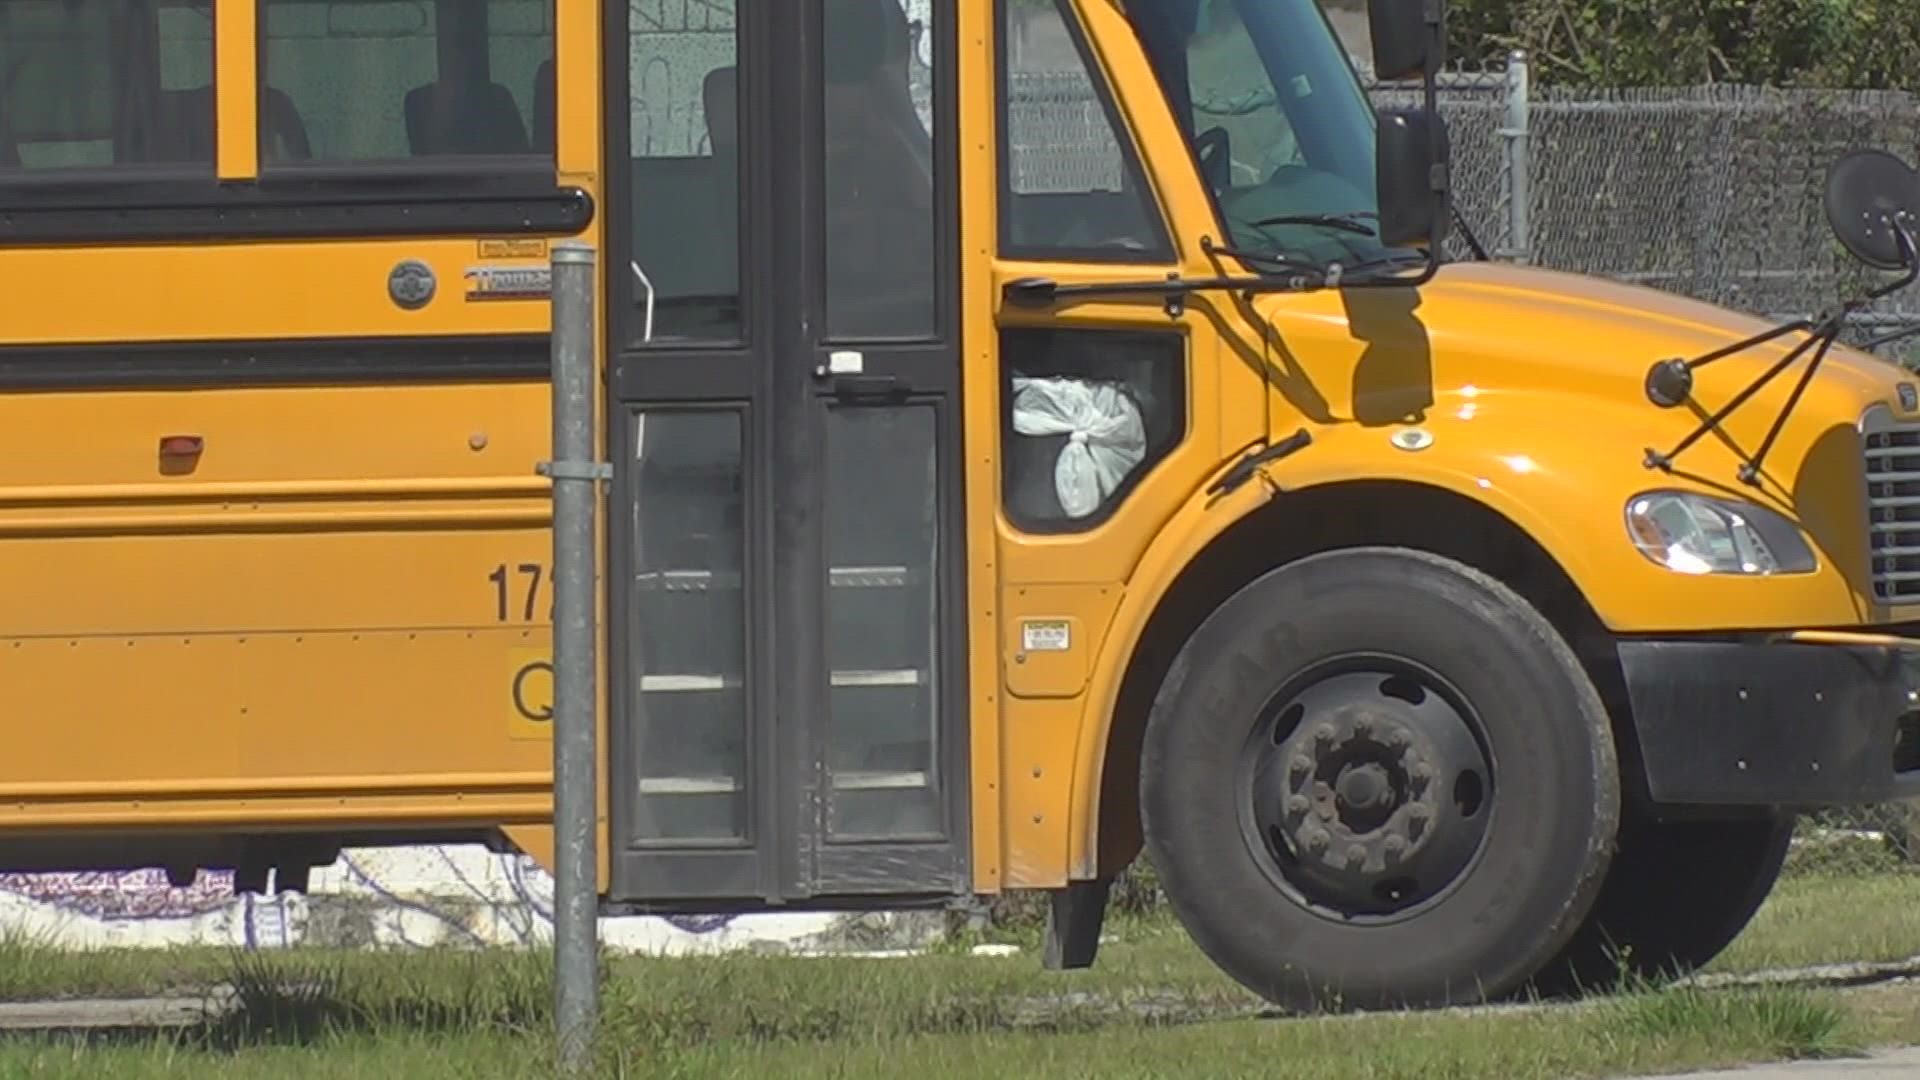 A young girl was struck by a dump truck after getting off of her school bus.